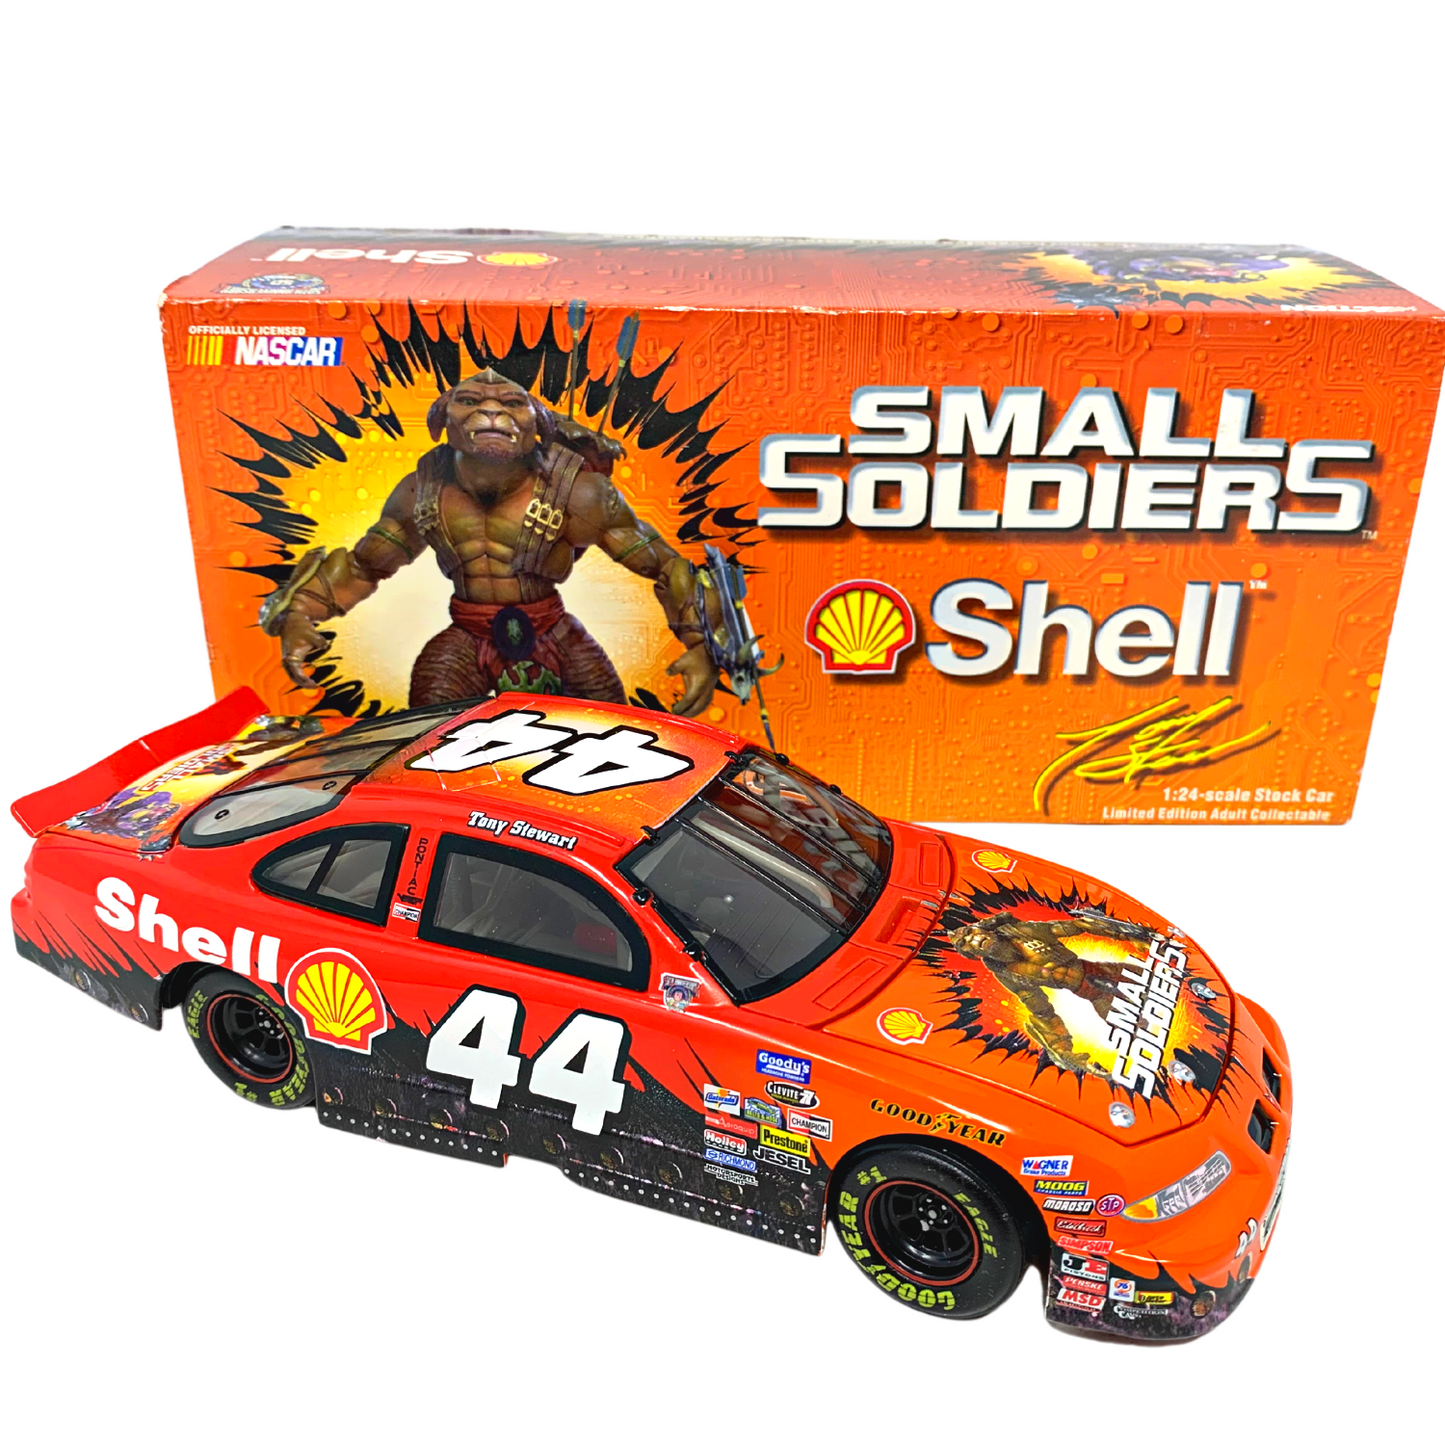 Action Nascar #44 Tony Stewart Shell Small Soldiers 1998 Pontiac 1:24 Diecast